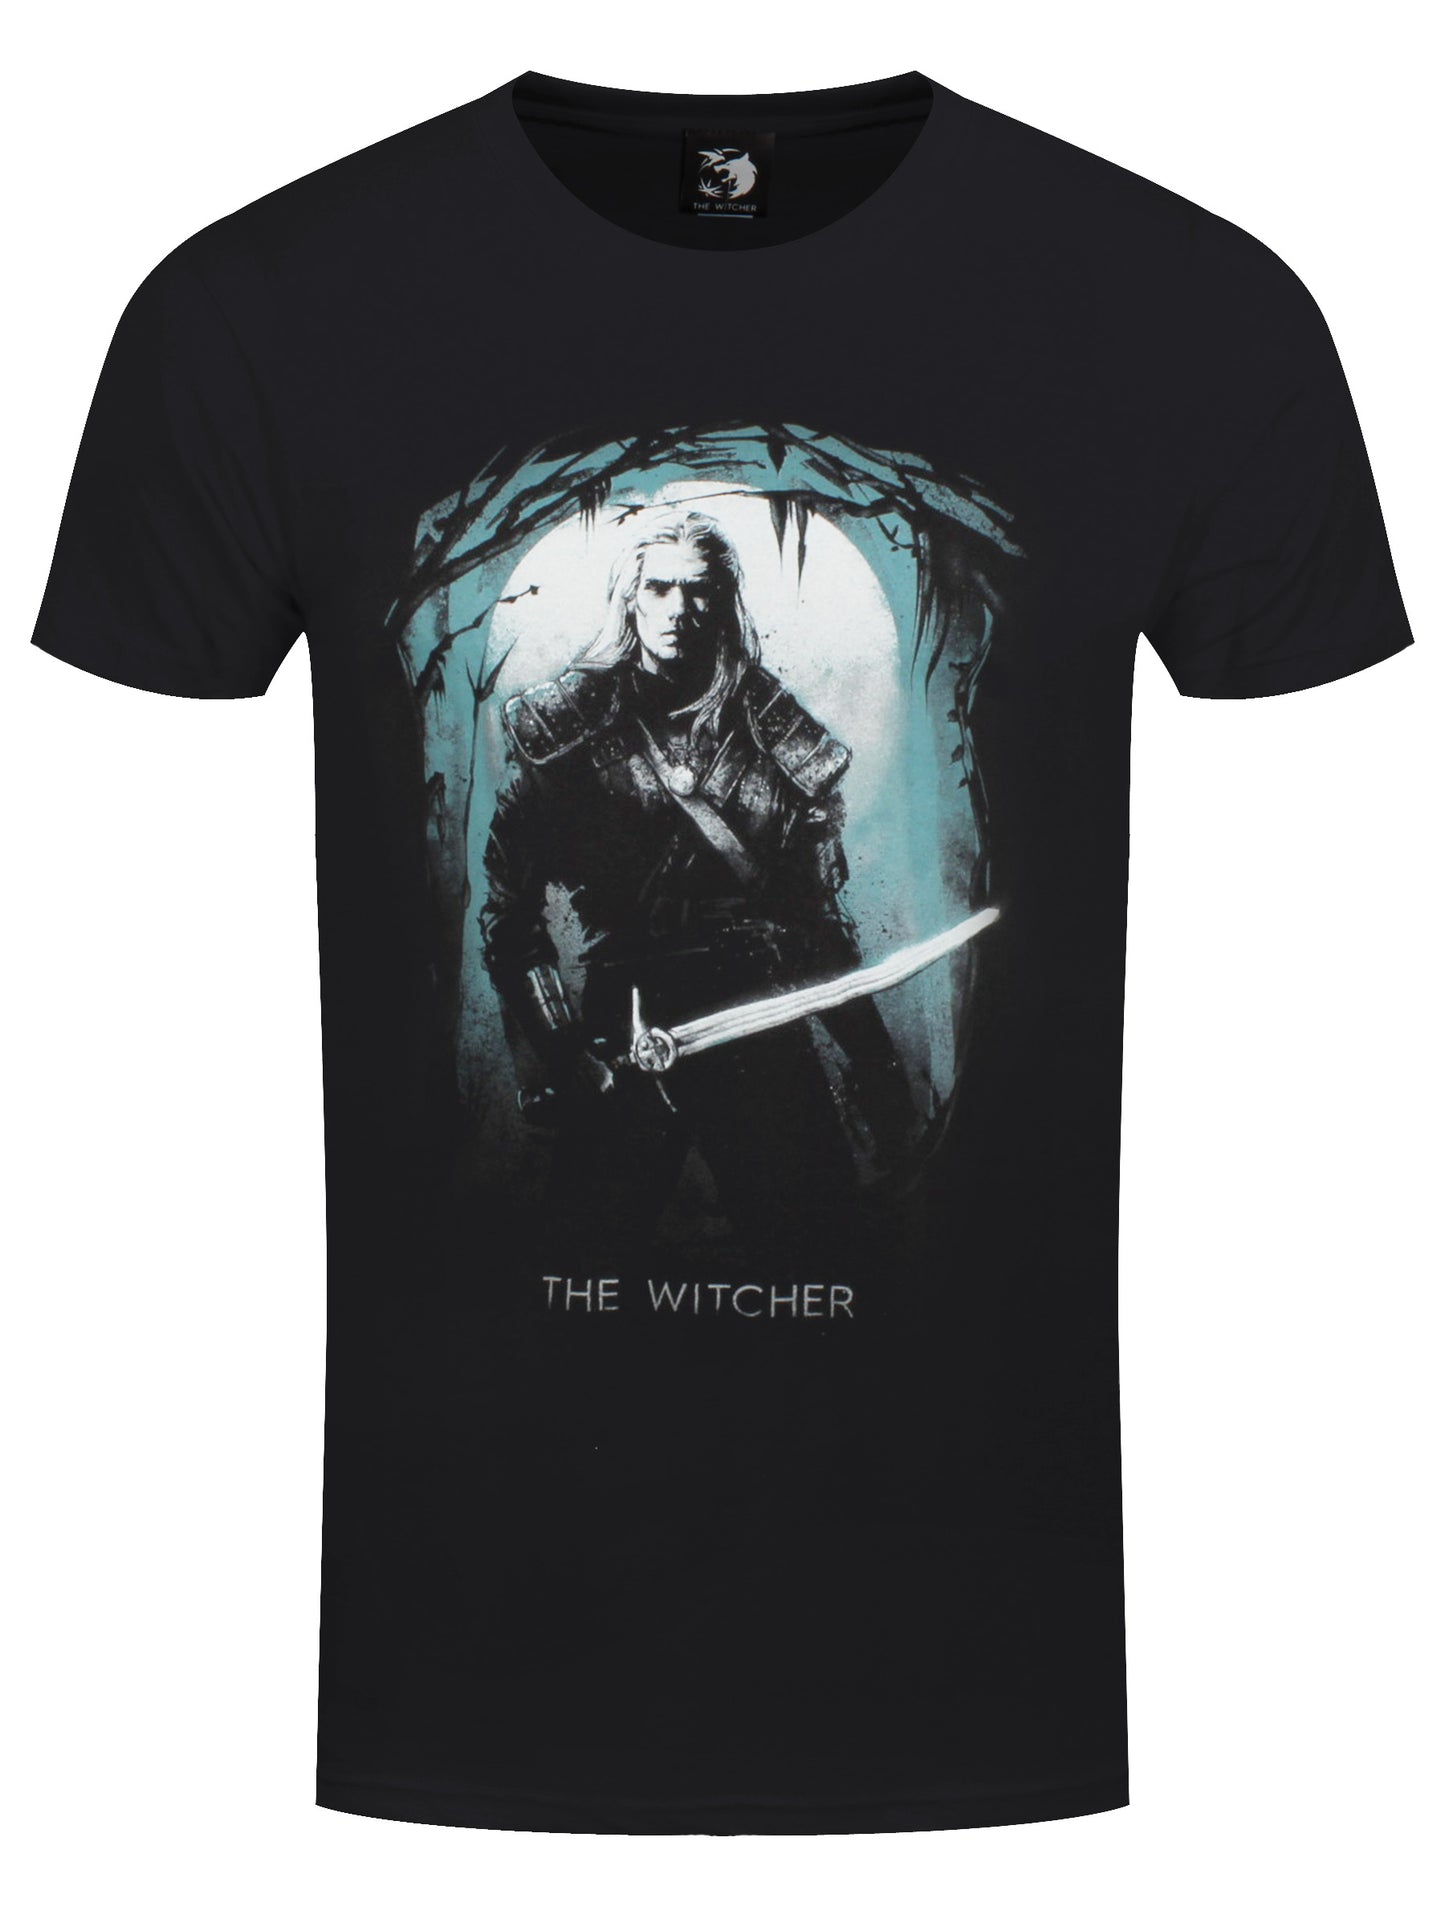 The Witcher Silhouette Men's Black T-Shirt